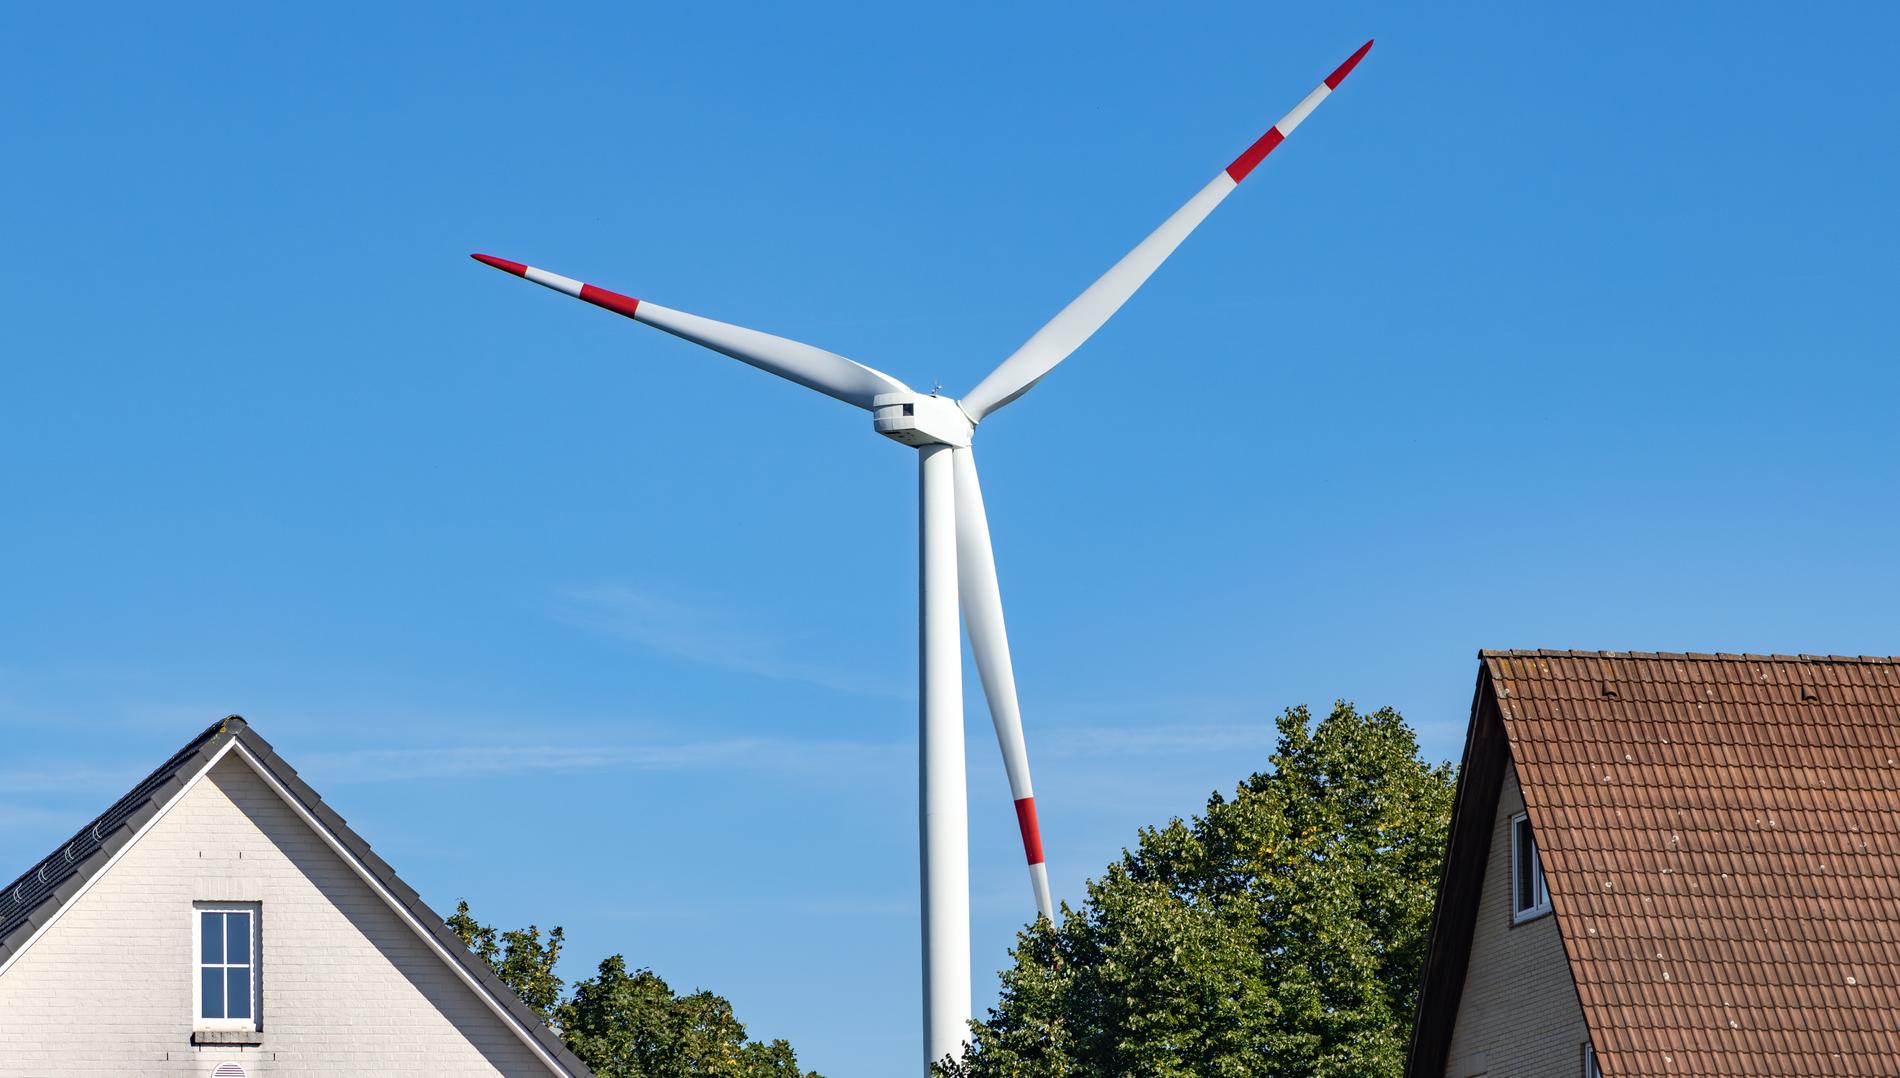 Are small wind turbines a good investment?